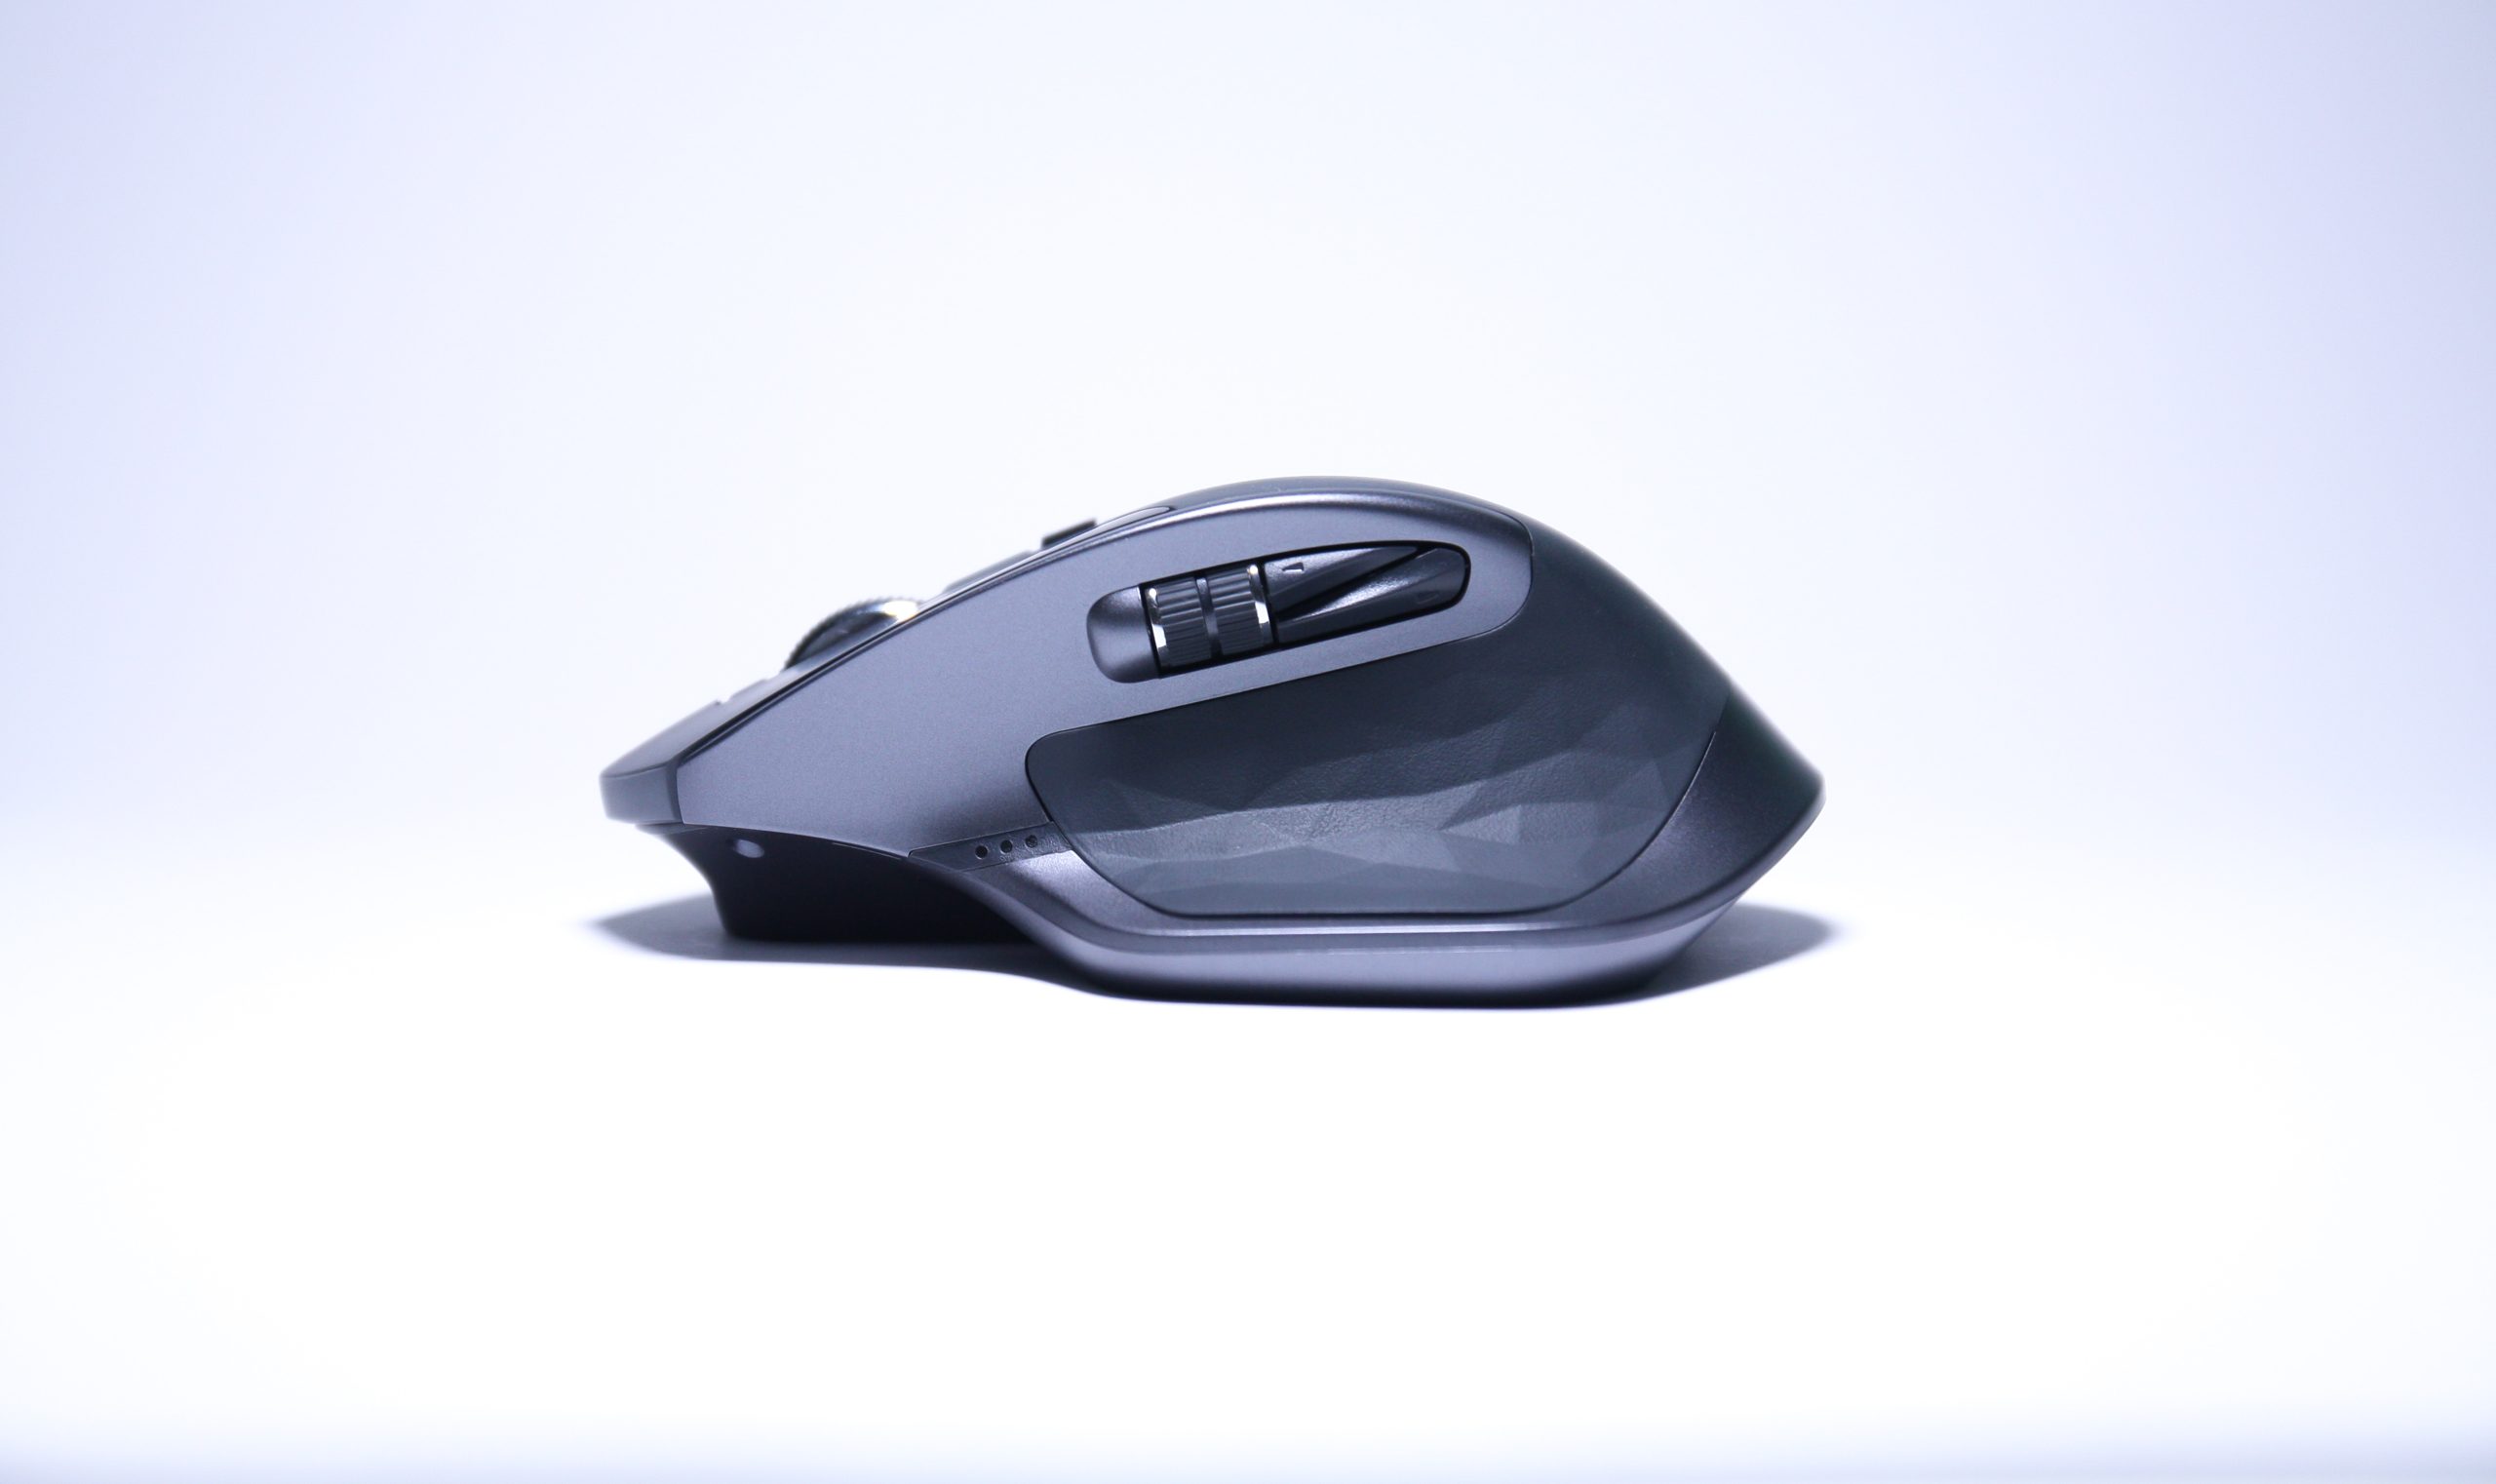 Sceptisch Historicus Matron How To Test The Quality Of A Mouse? - Blogs by Redington